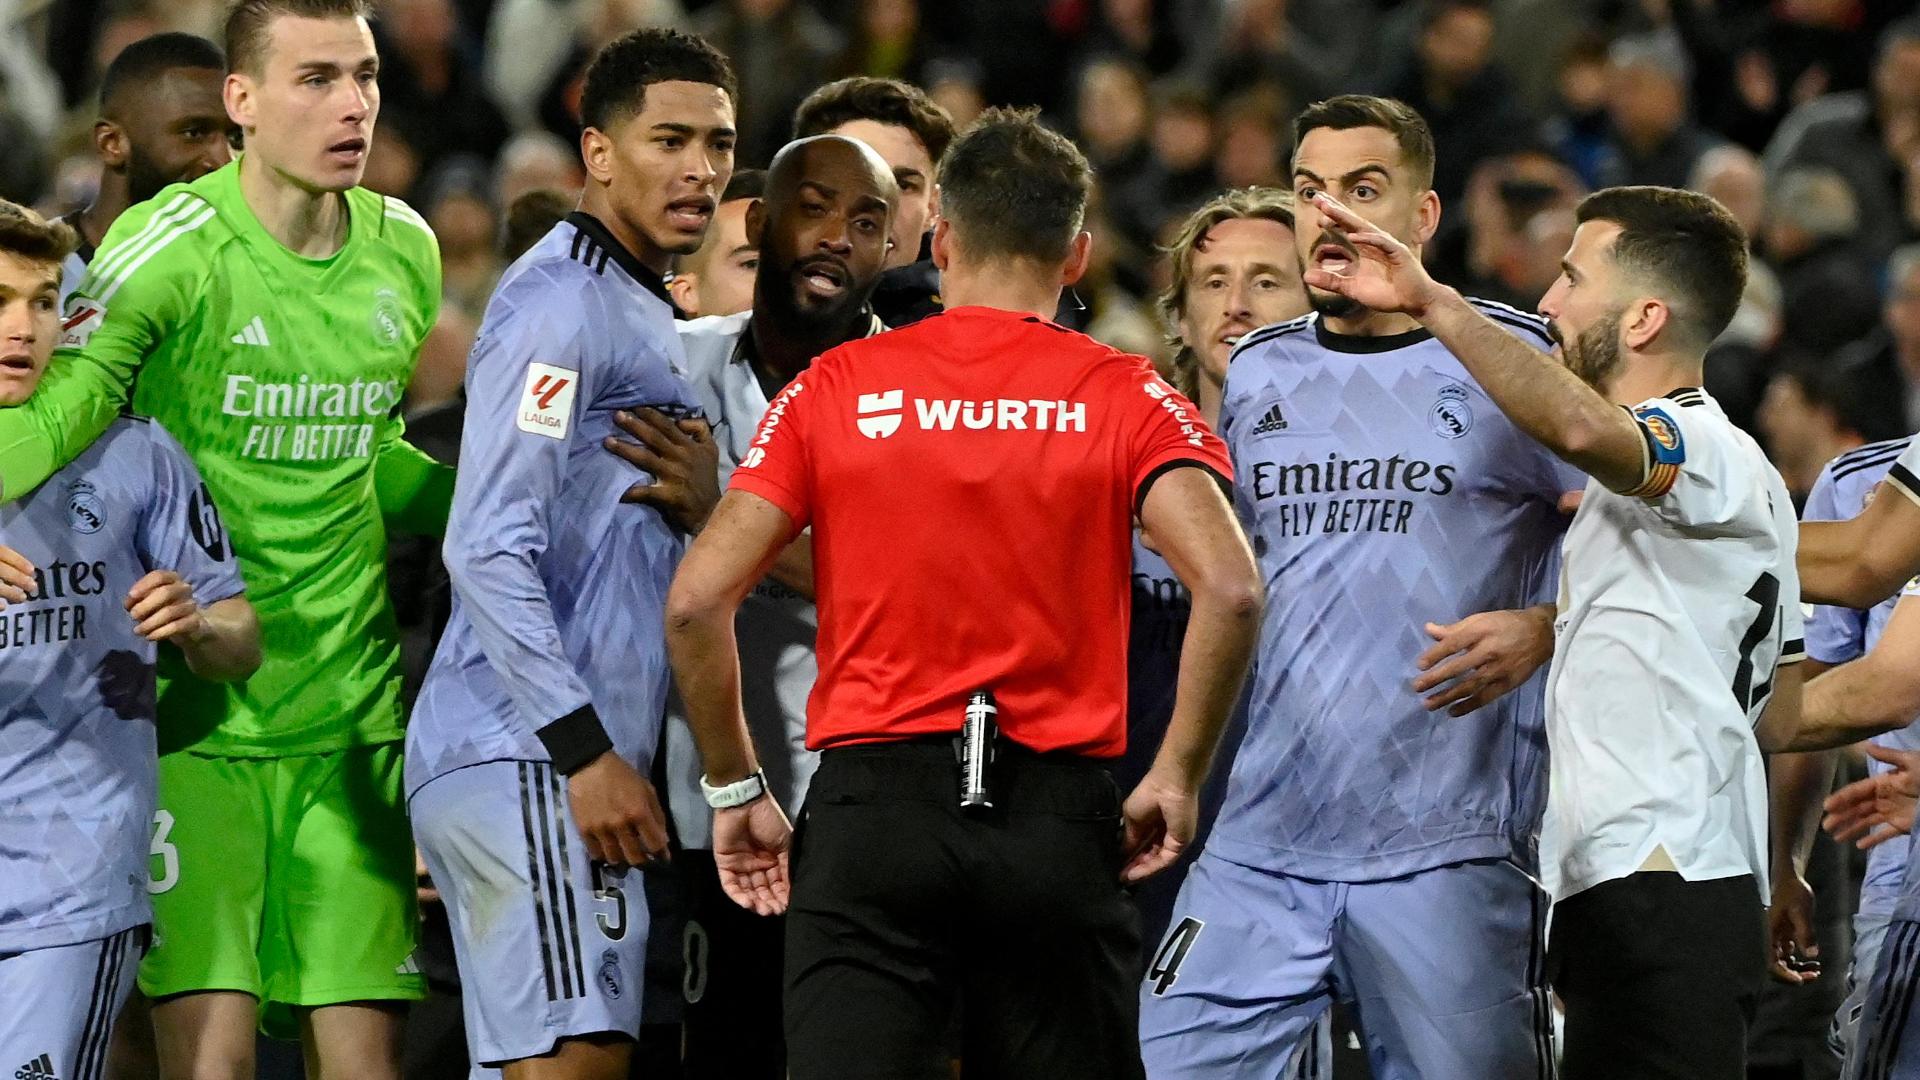 Mayhem ensues at the final whistle in Real Madrid game